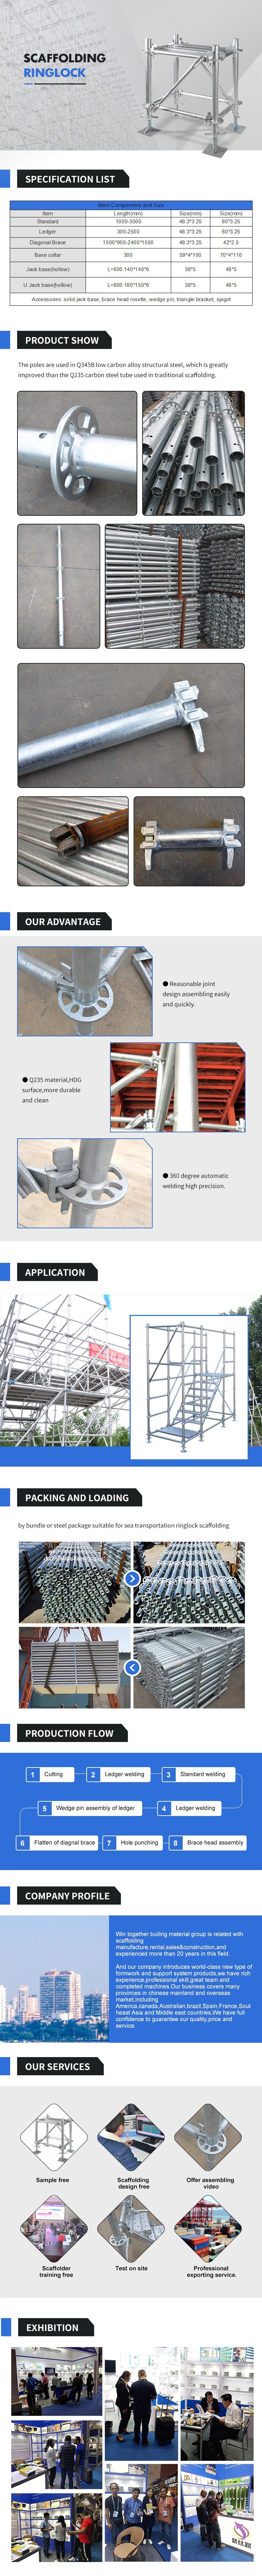 Quickstage Scaffolding Material Name List with High Quality